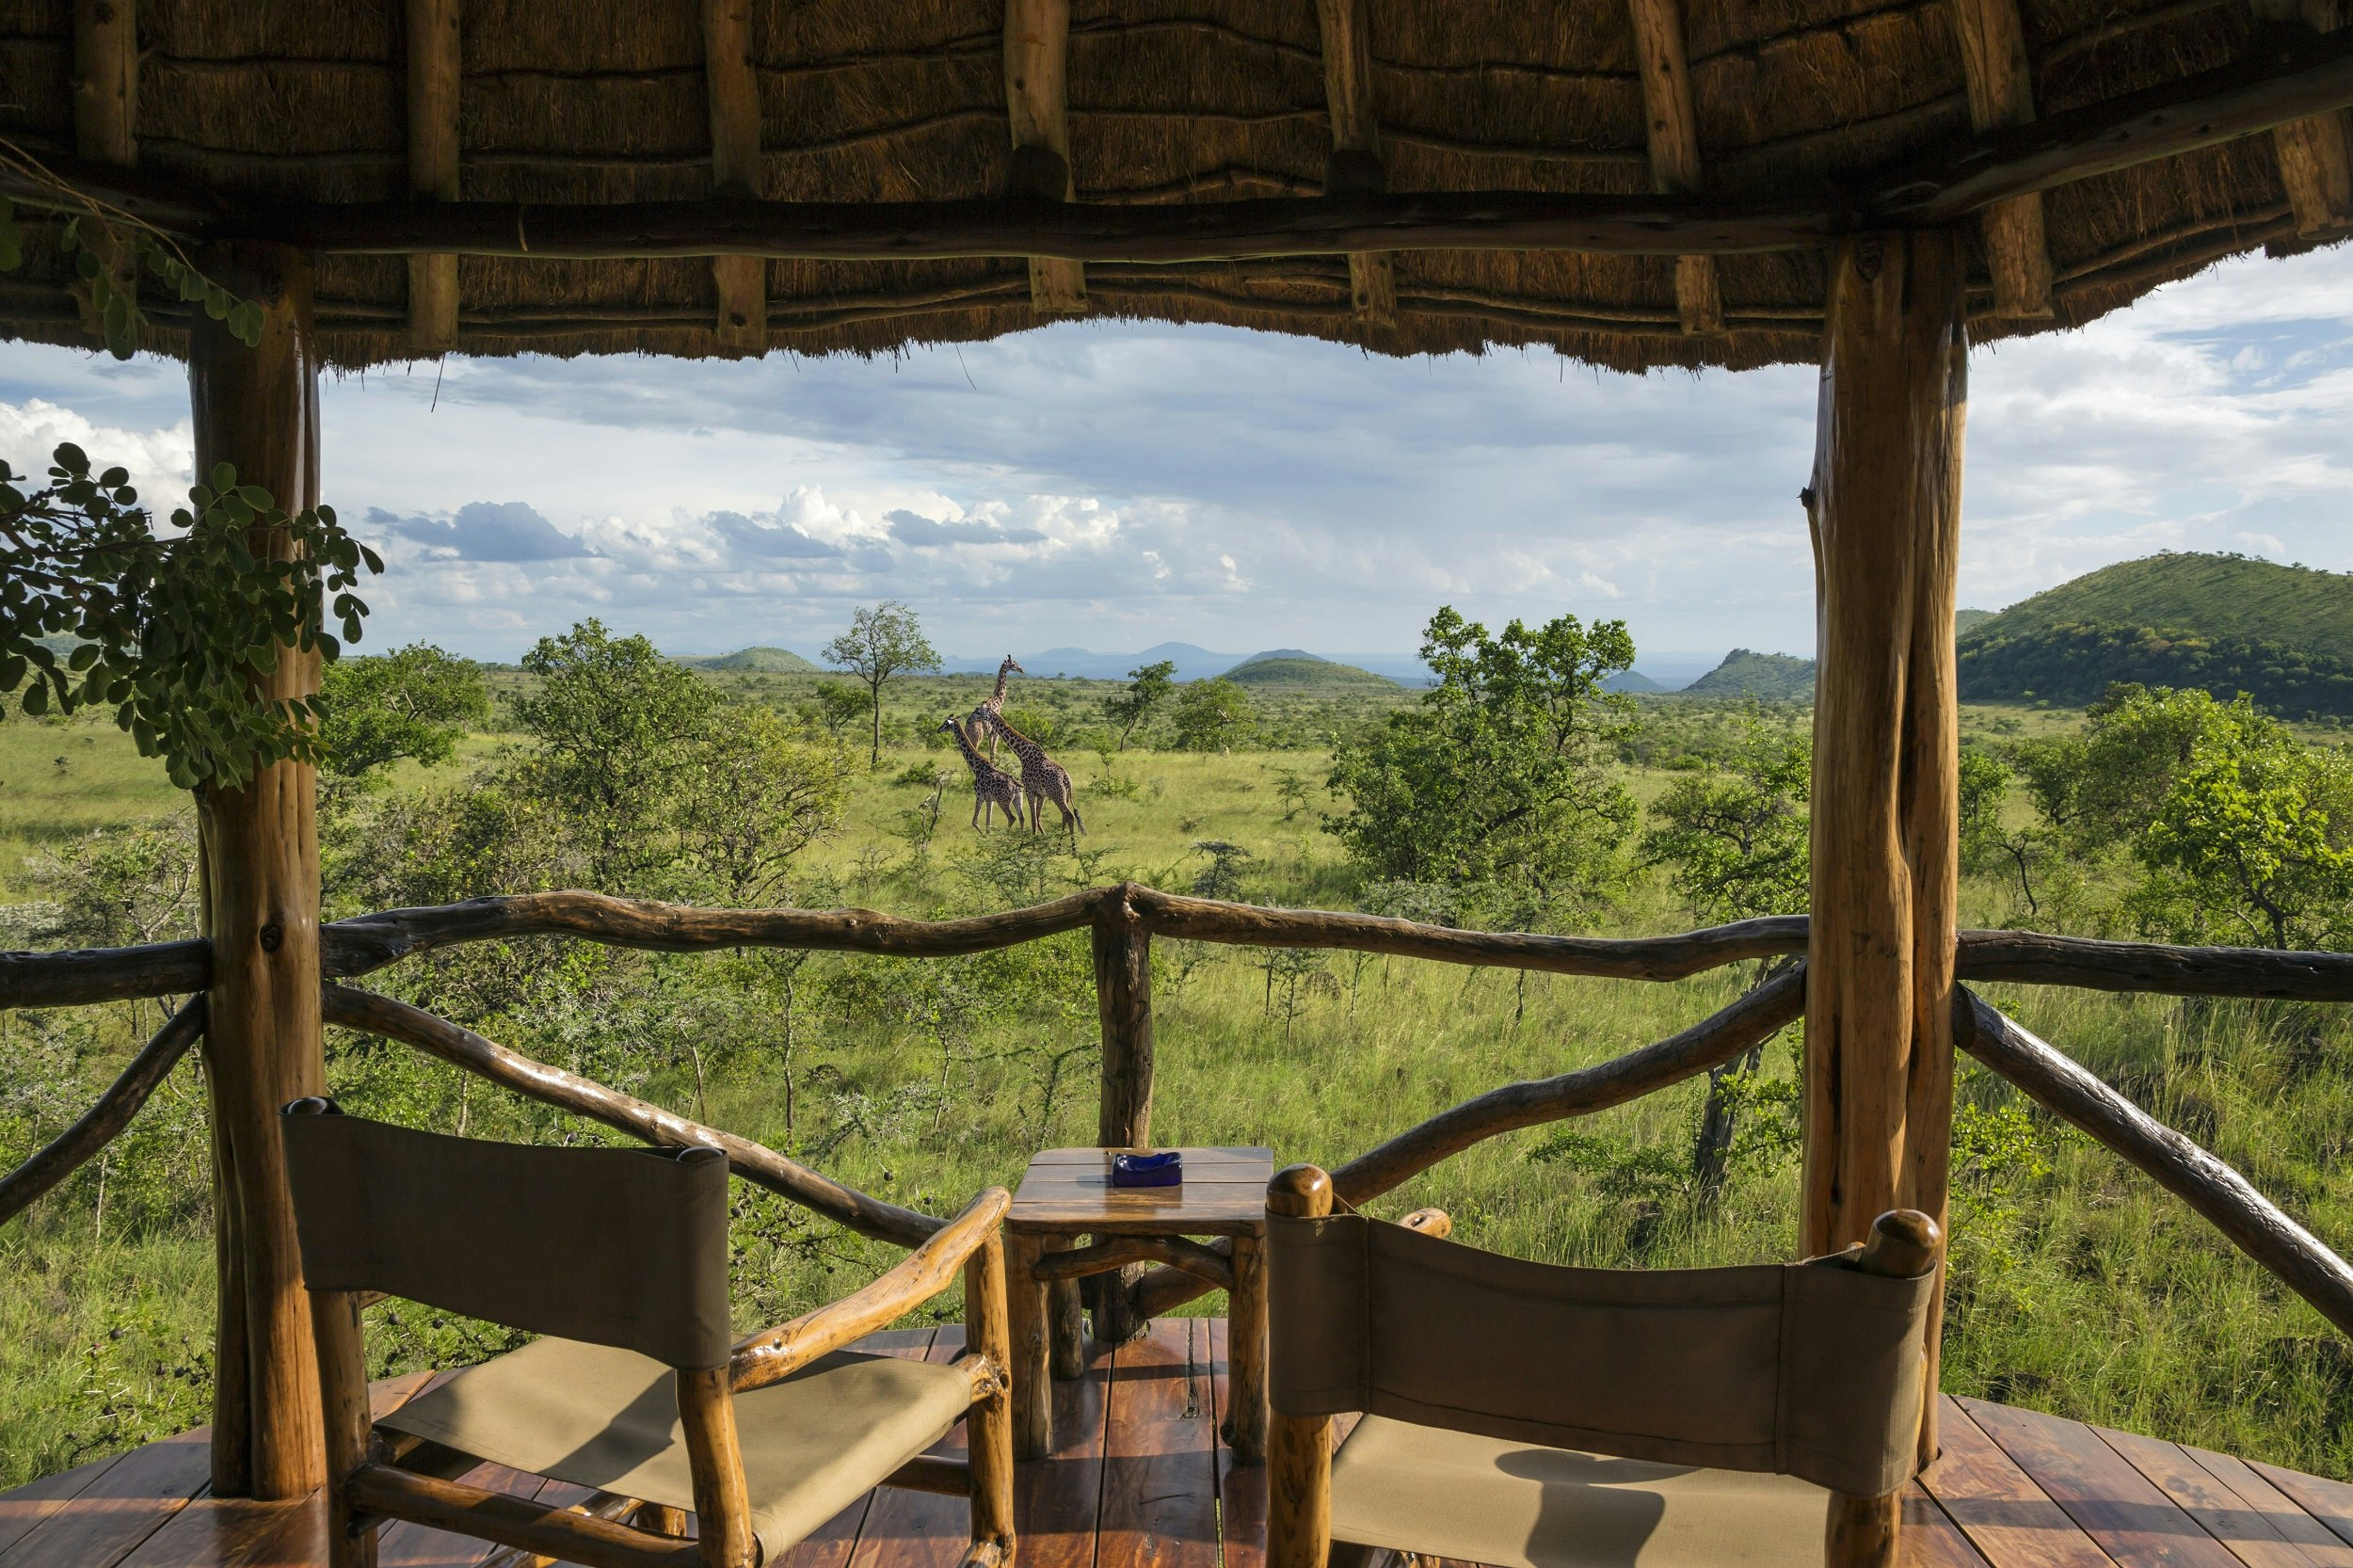 Looking out over a couple of wooden chairs on the balcony of a thatched-roofed lodging building, there are three giraffes walking in the green grass of the Chyulu Hills.